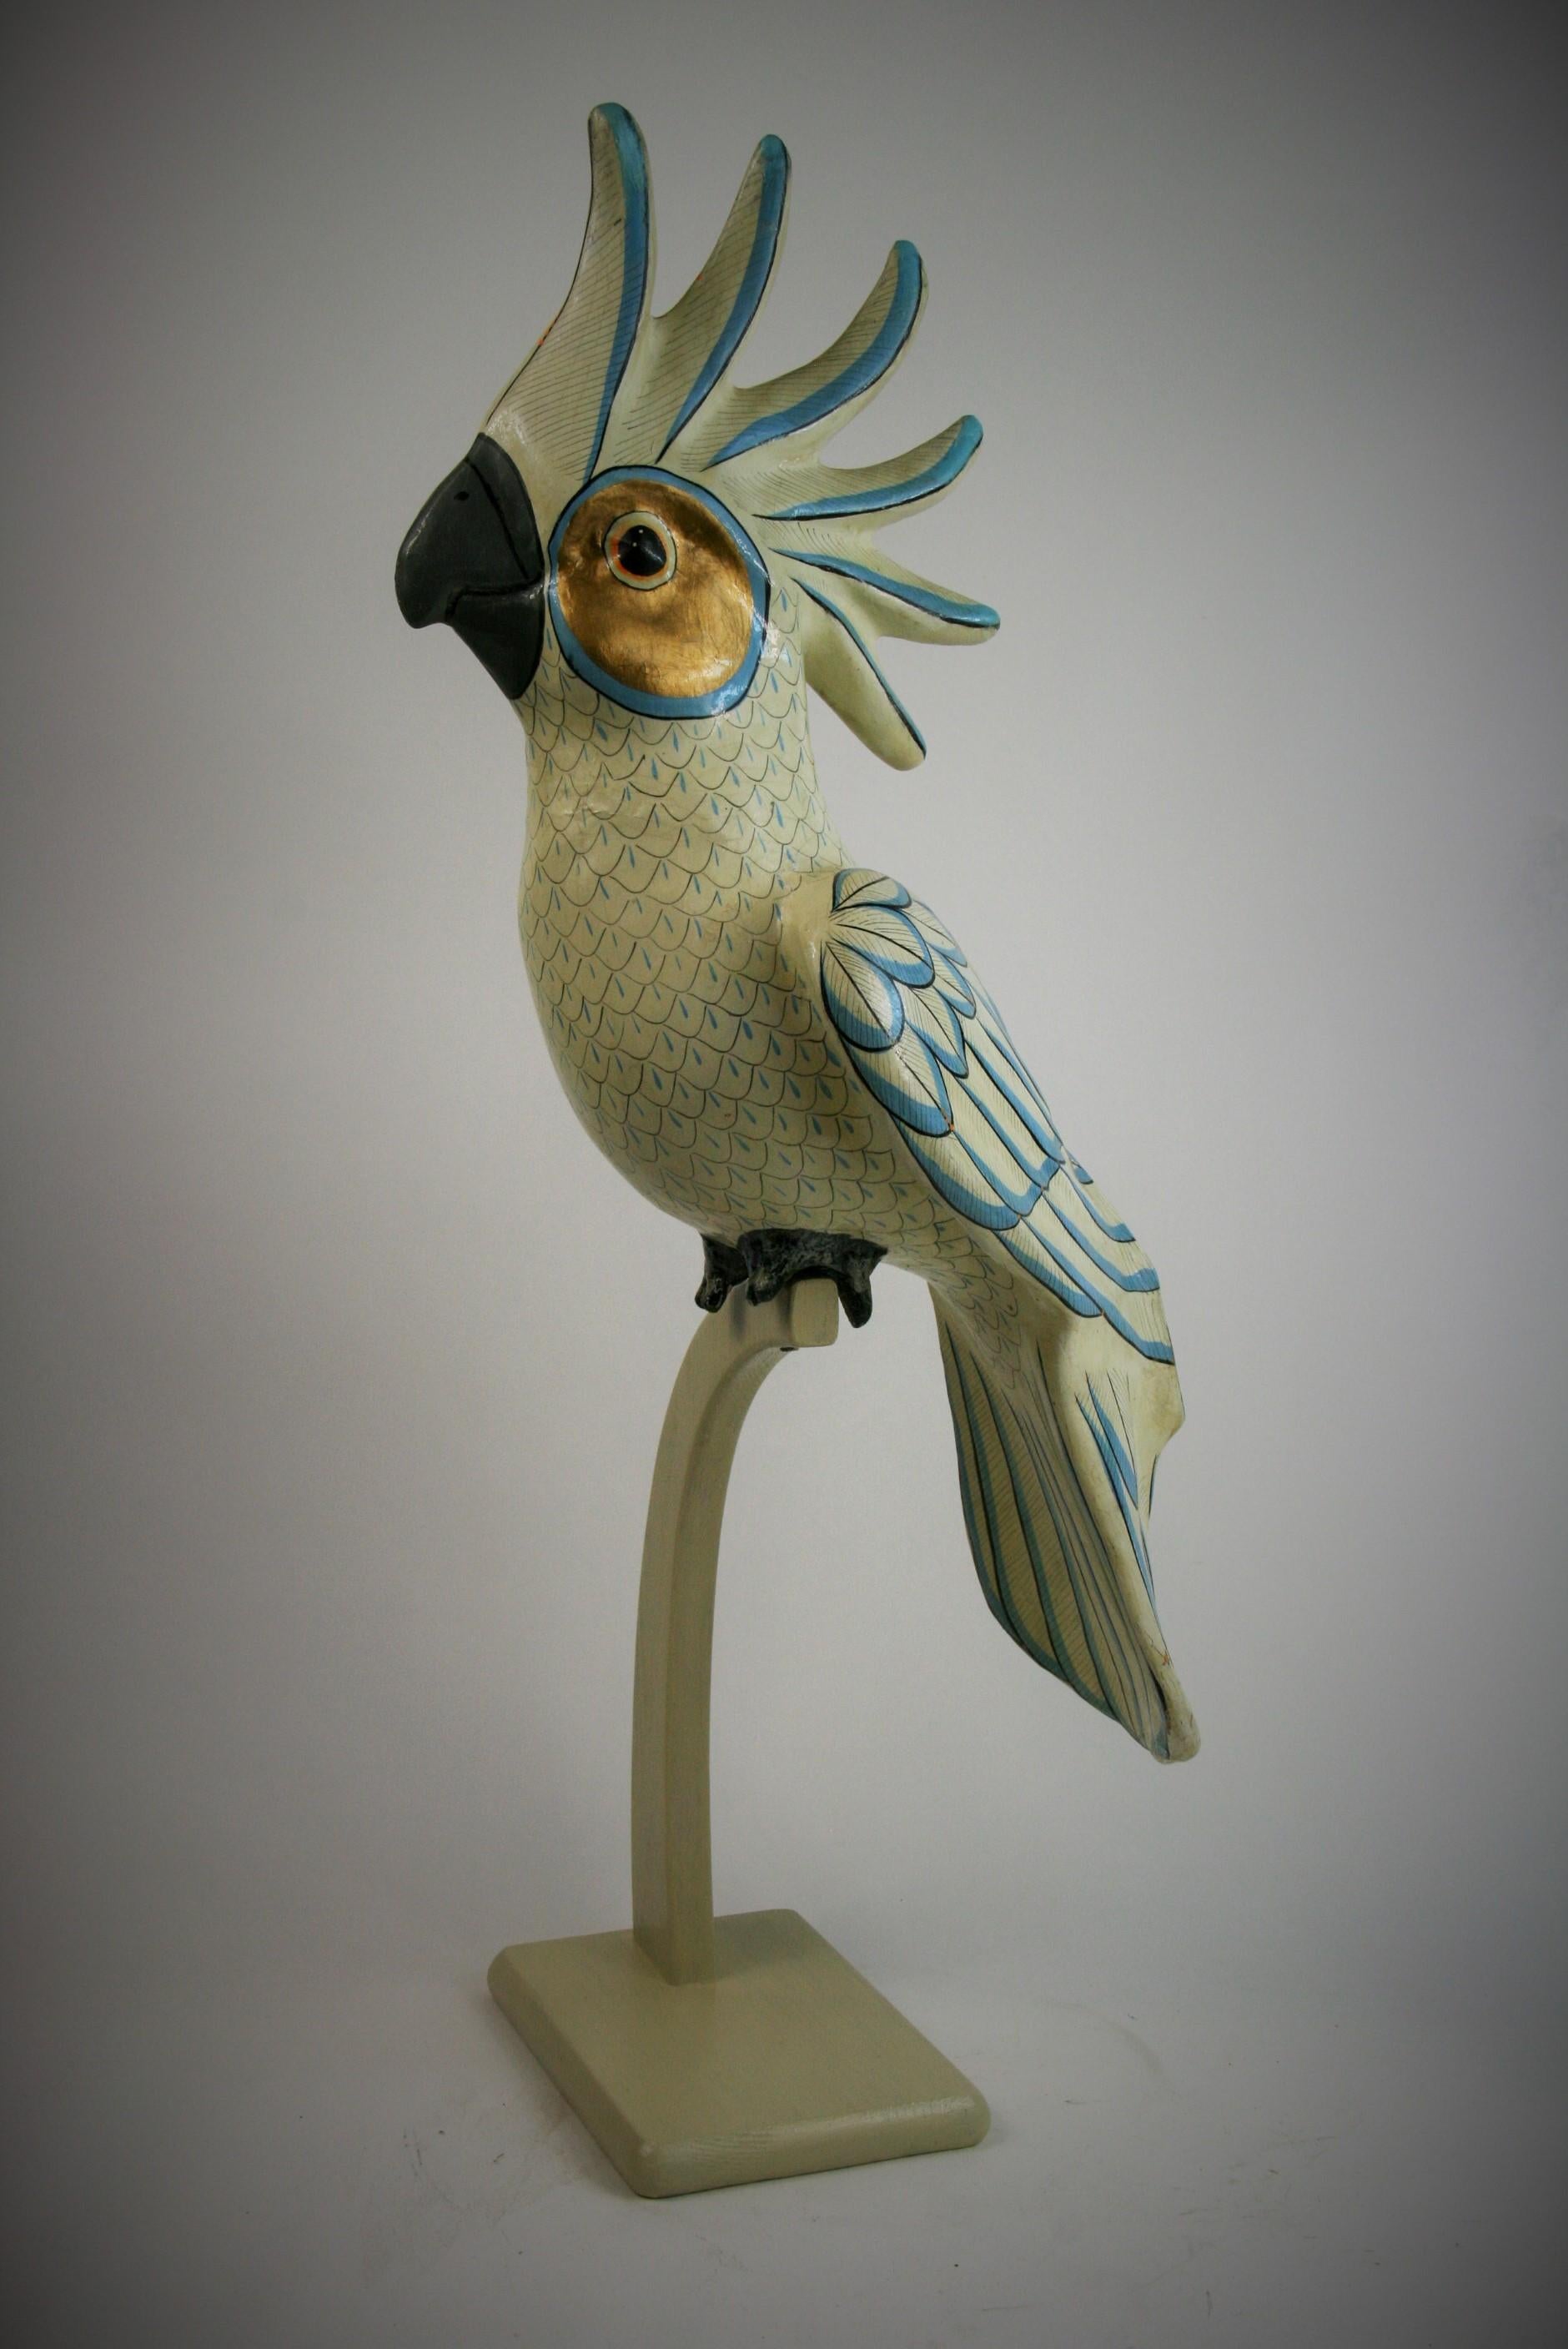 8-287 papier mâché oversized cockatoo sculpture set on a custom wood perch from the workshop of Mexican artist
Sergio Bustamante, circa 1970.